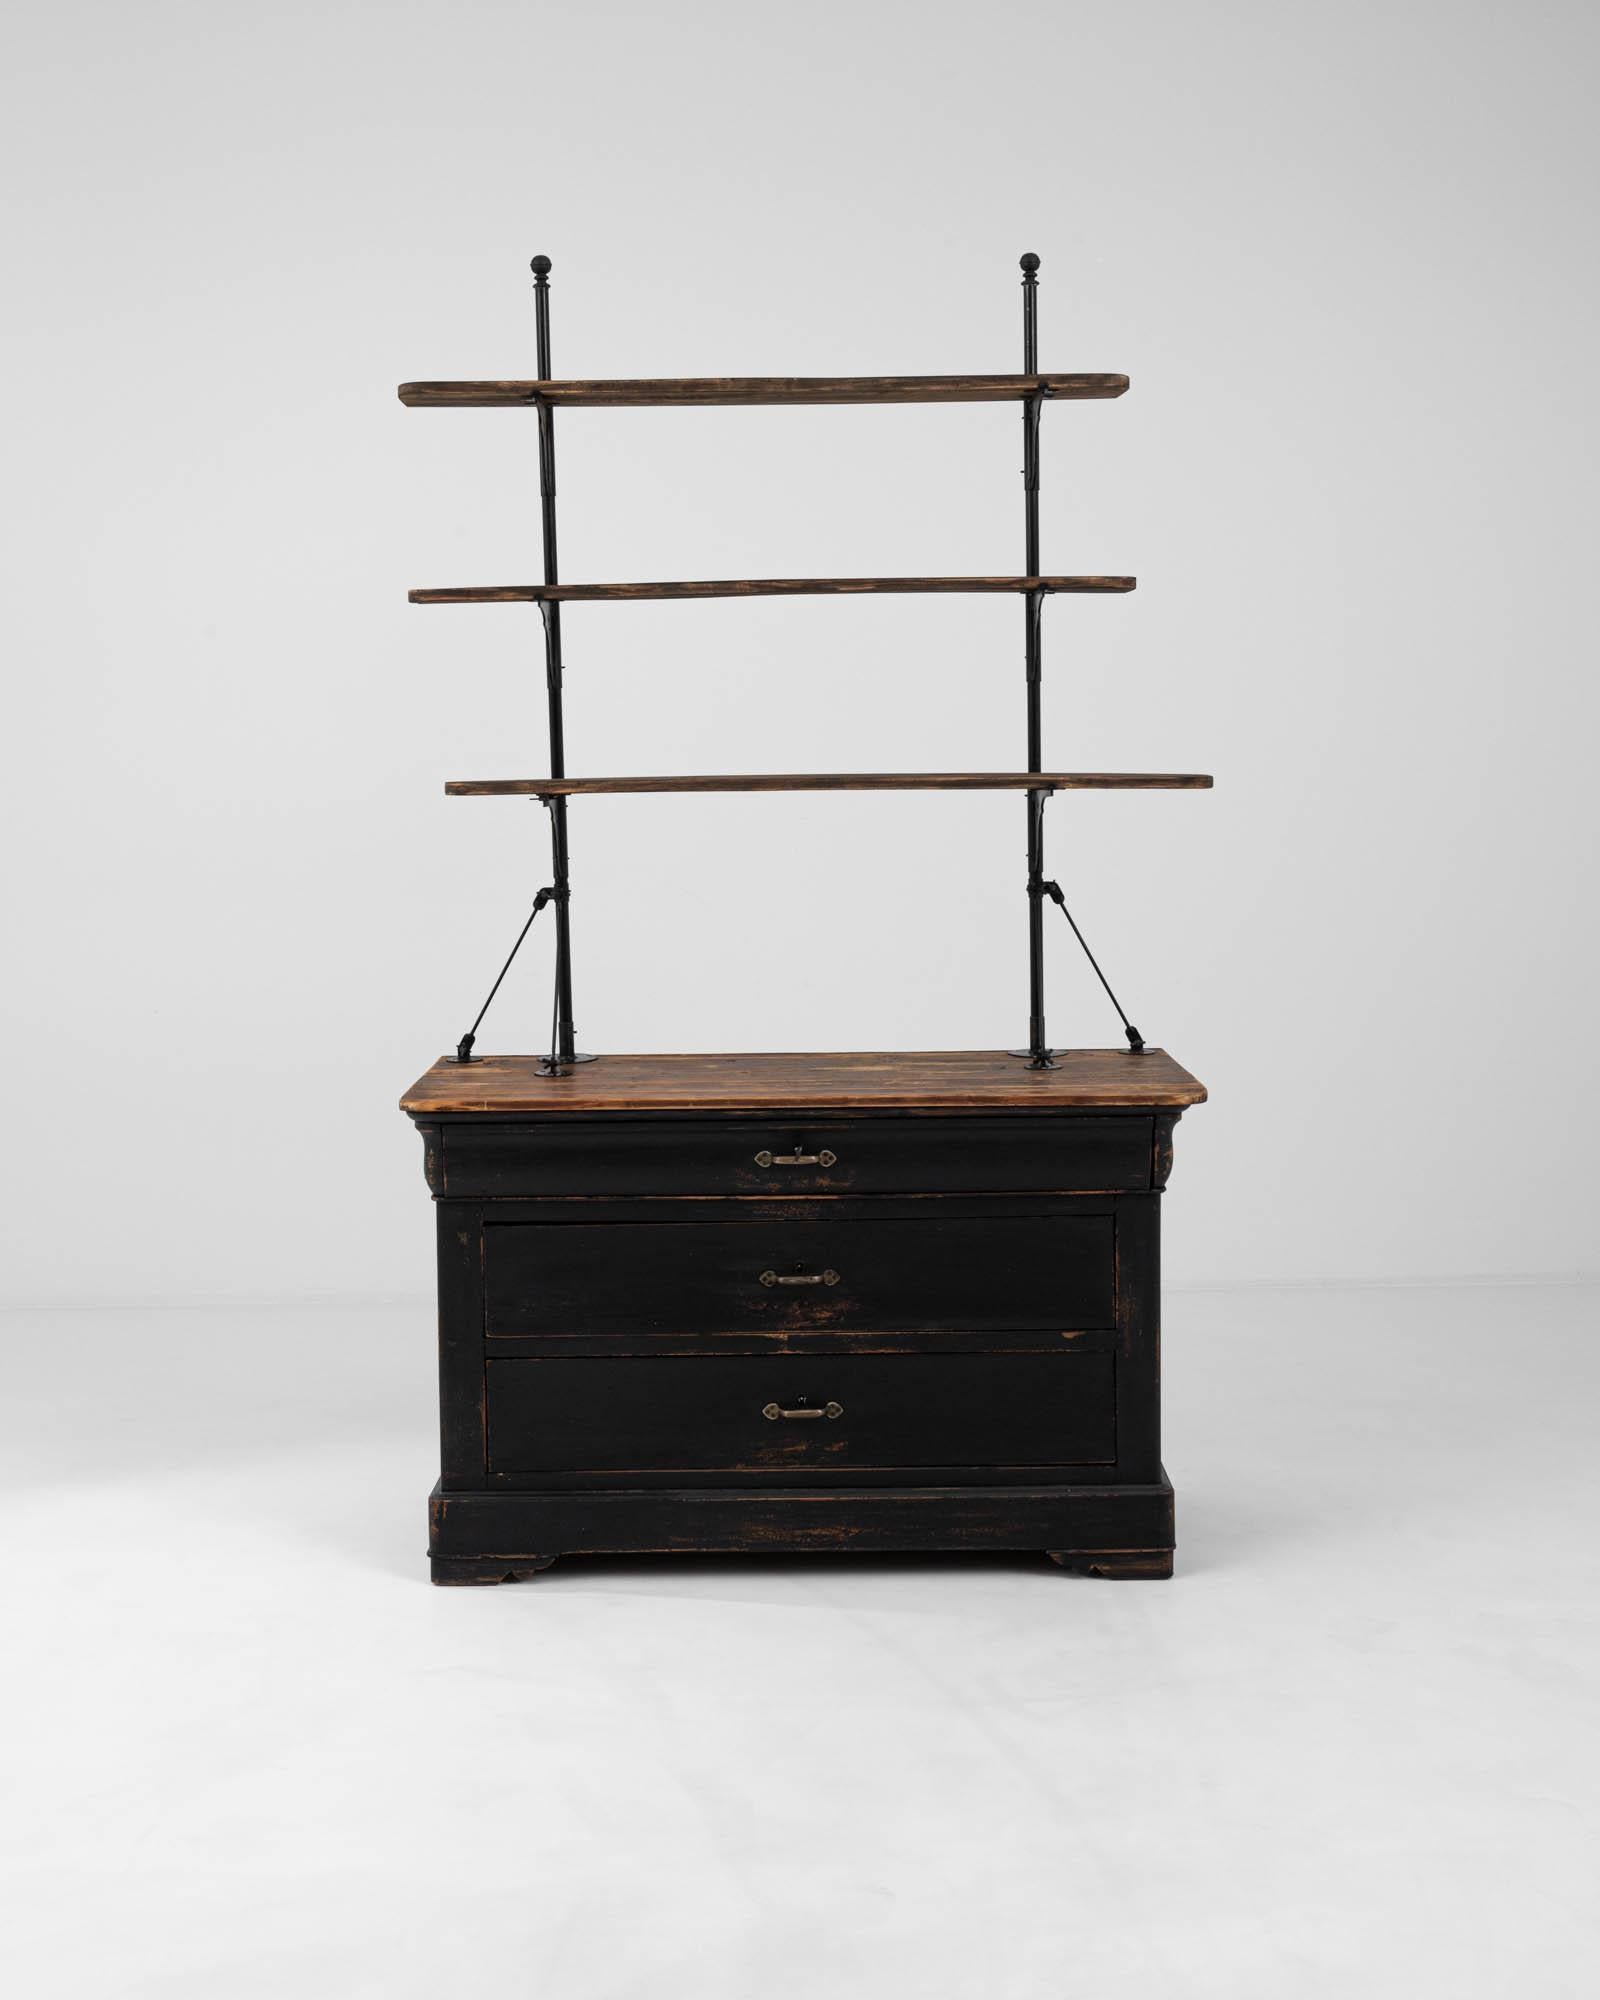 A wooden display cabinet from France, produced during the 19th century. This black patinated cabinet is an unexpected totem of the 1800s: iron and wood, joined together by industry, rising towards the heavens as part of man’s march of progress: